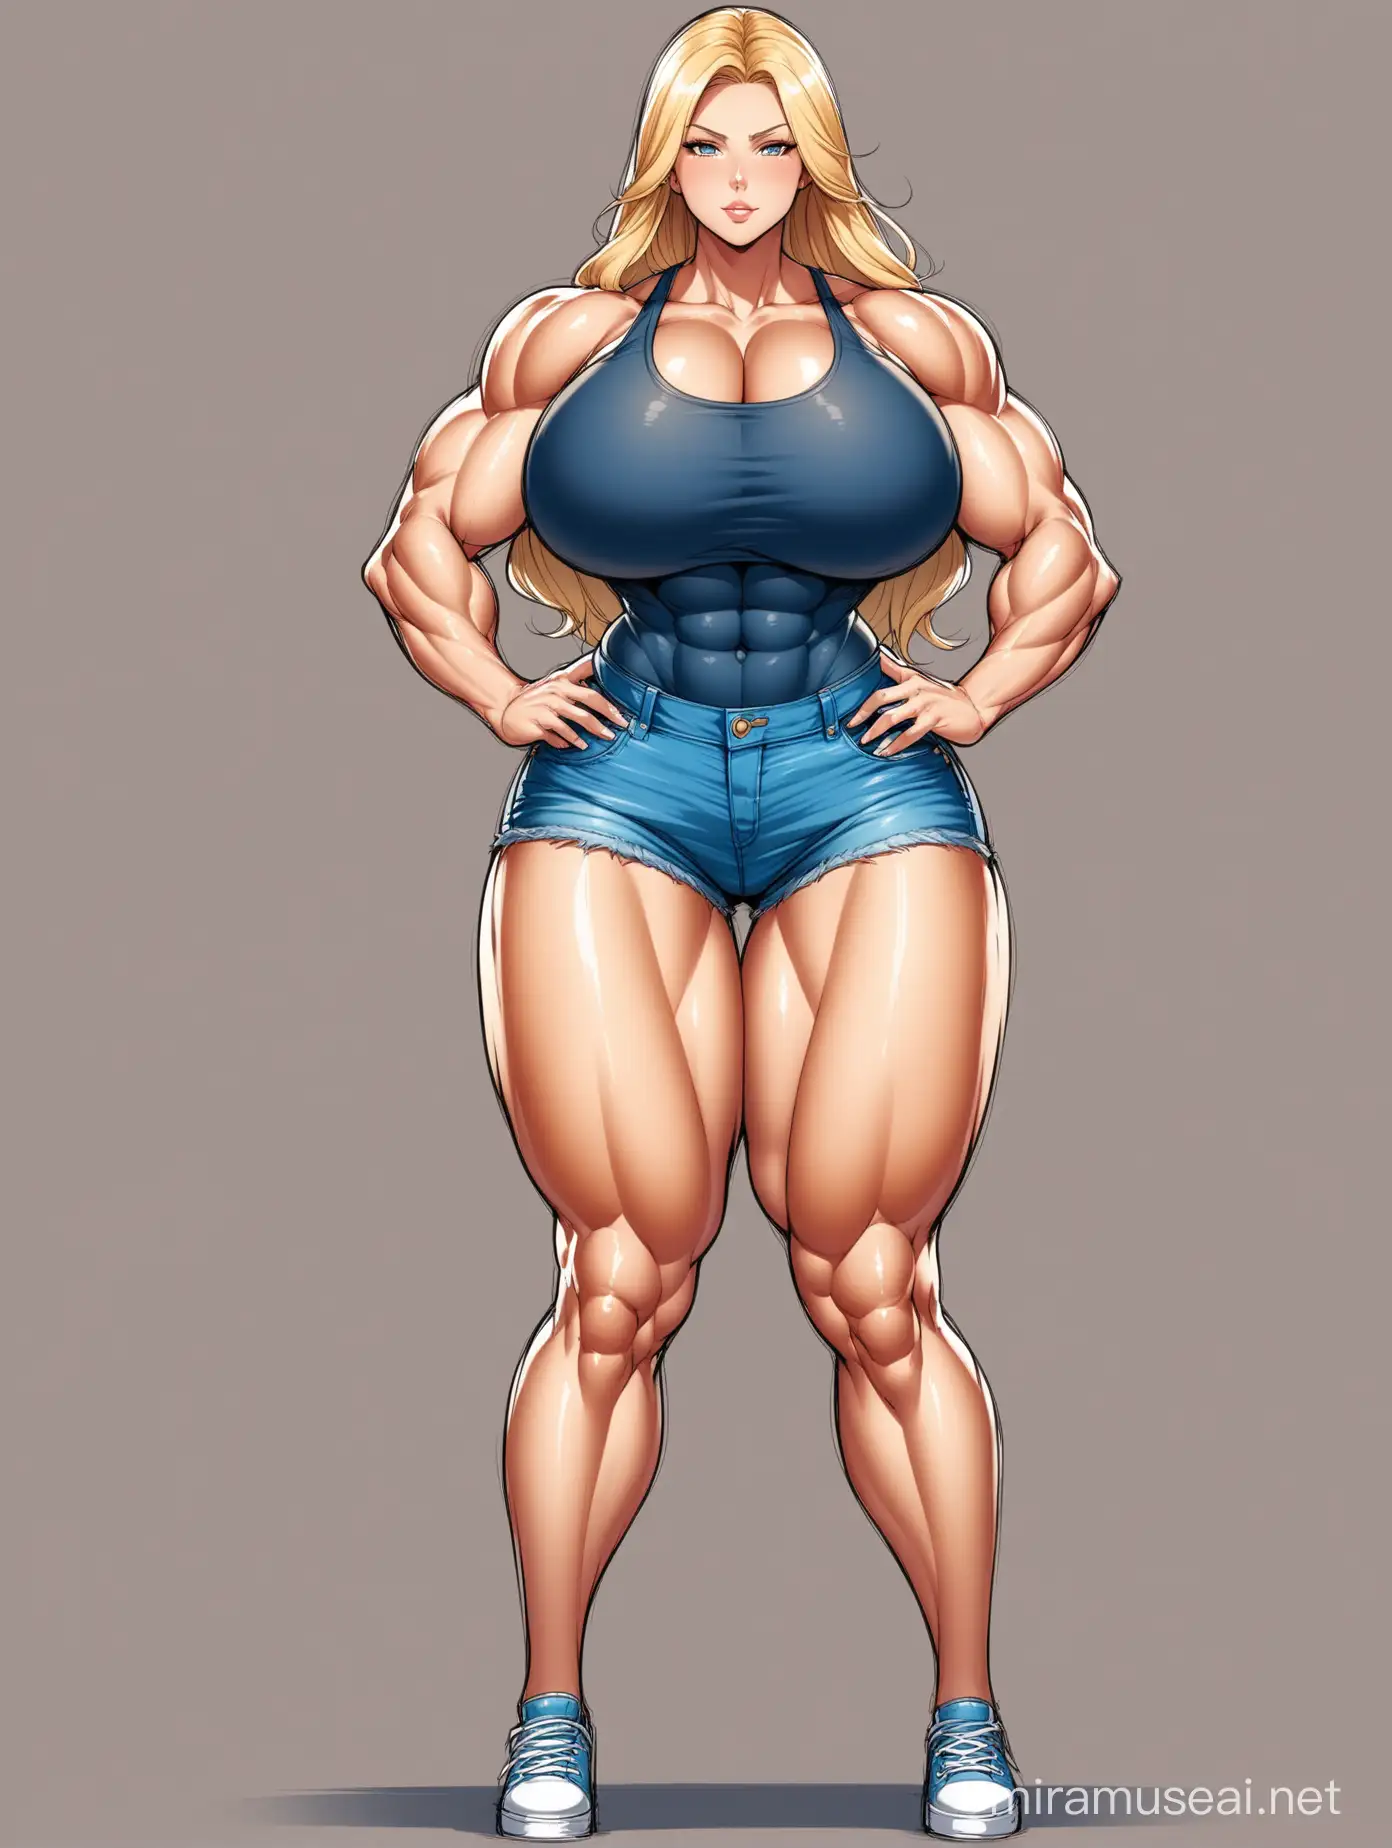 Full color drawing of a blond woman with a beautiful, delicate face, huge chest, extremely large chest, enormous chest, colossal chest, very thin waist, extremely thin waist, wide hips, strong legs, huge legs, very wide and muscular legs, wearing casual clothing, including a top and jean shorts. Emphasize her immense chest, her massive chest